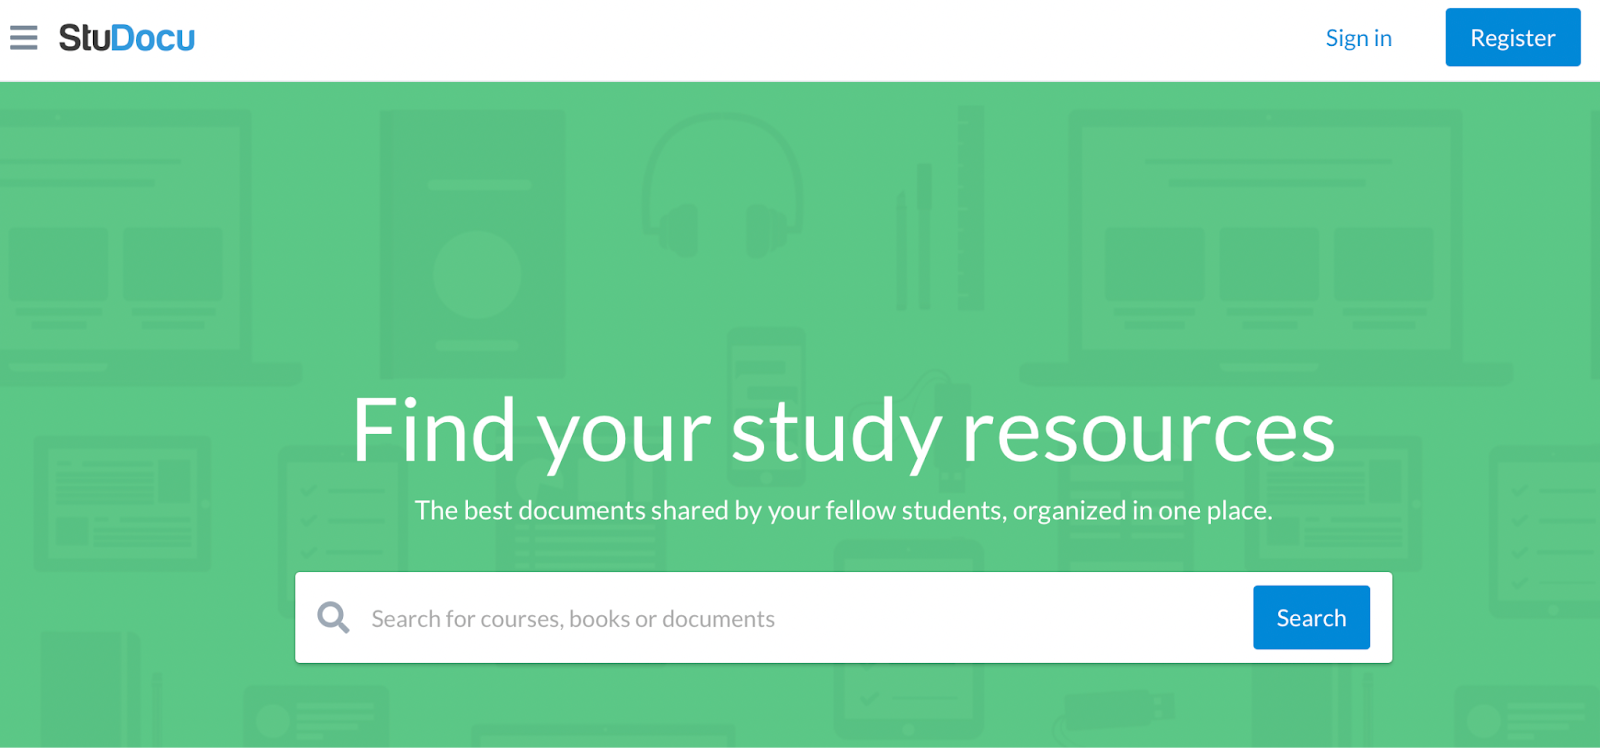 screenshot from studocu on find your study resources